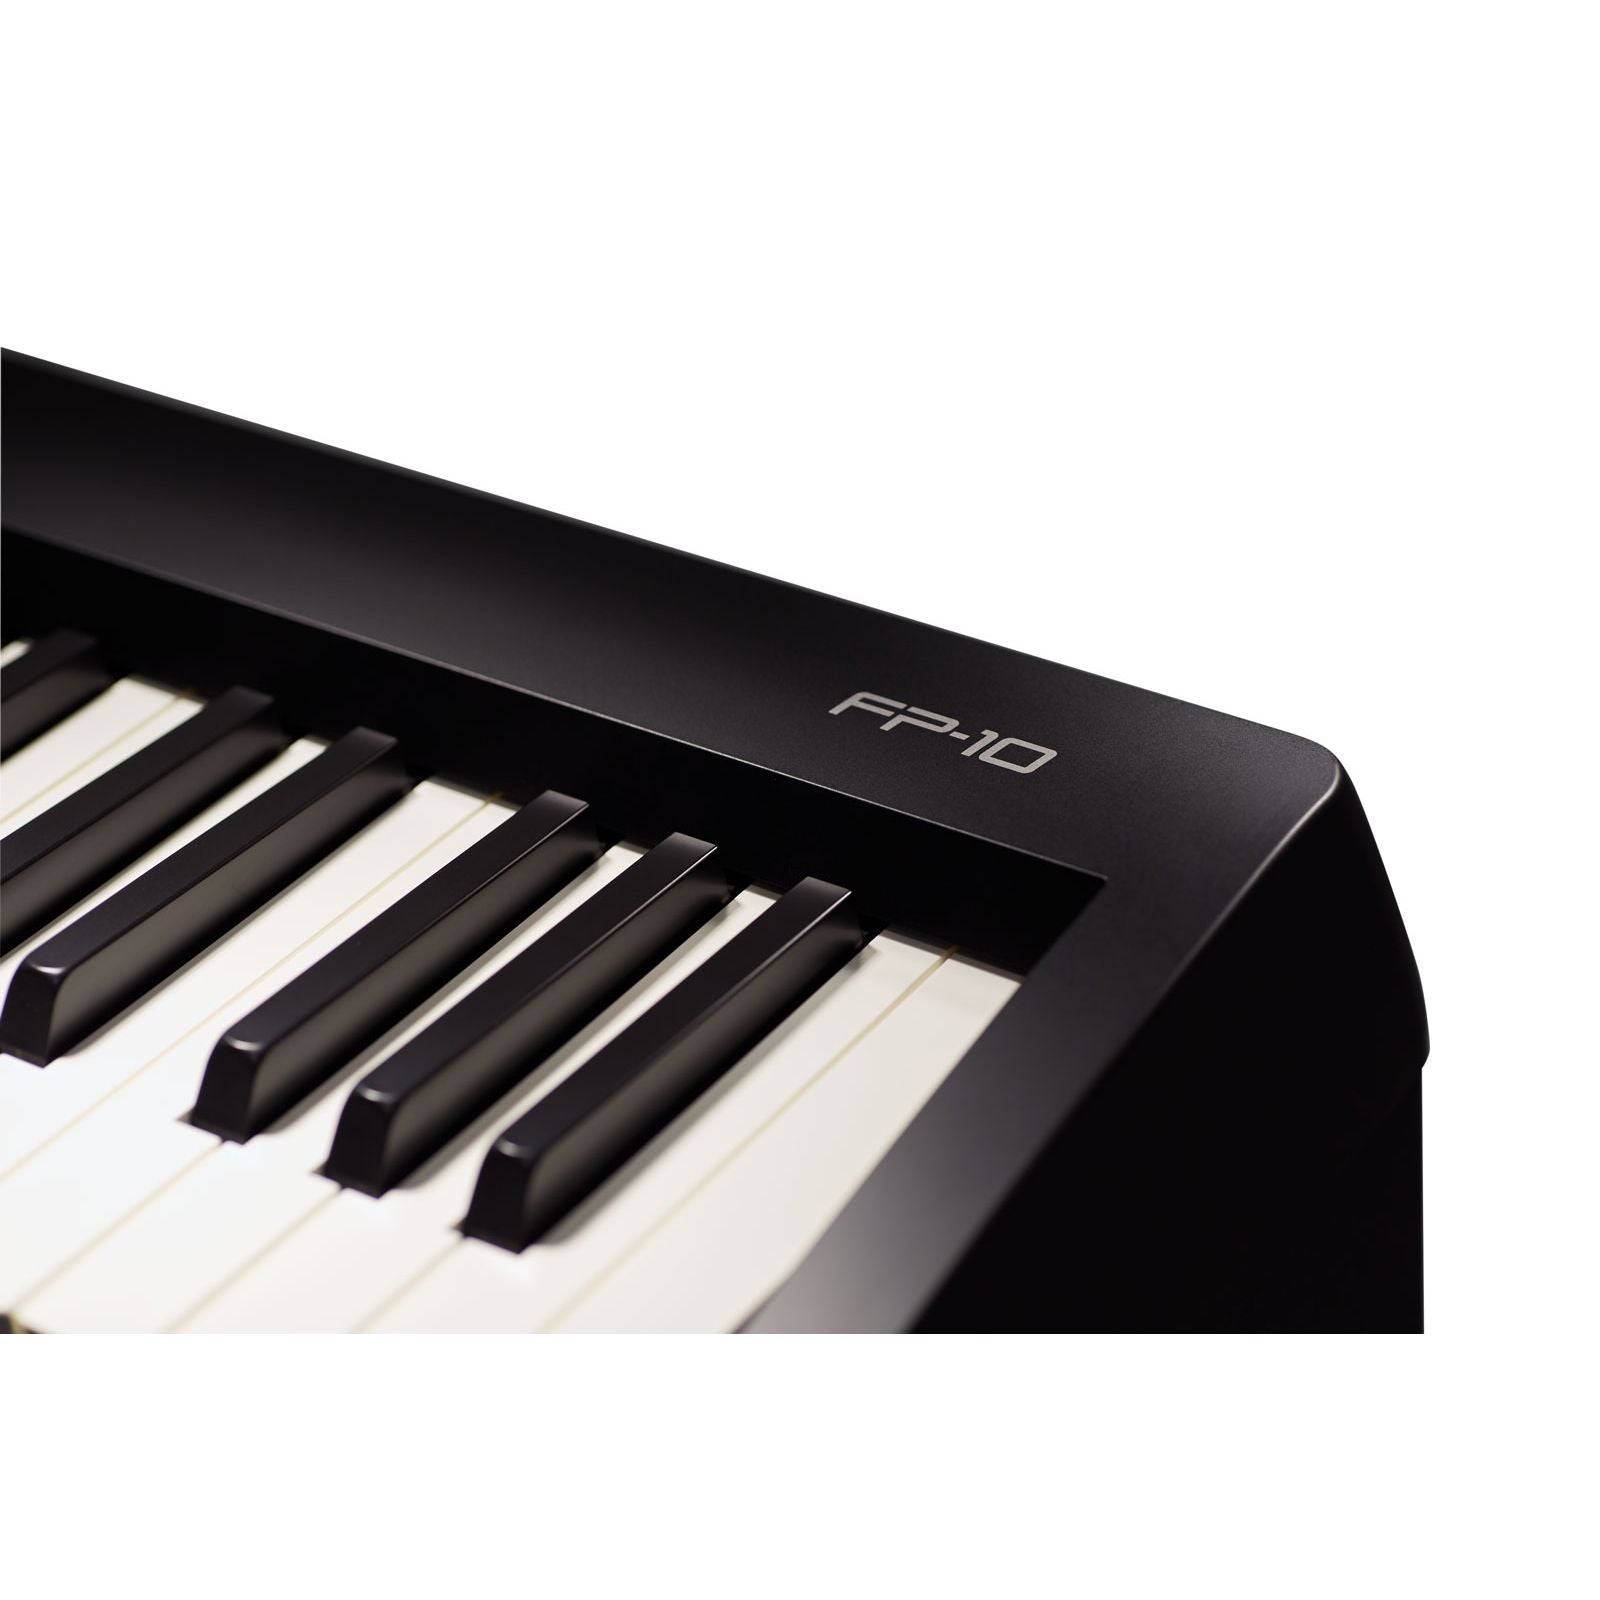 Roland FP-10 Digital Piano with Music Rest + Free Headphones worth $55